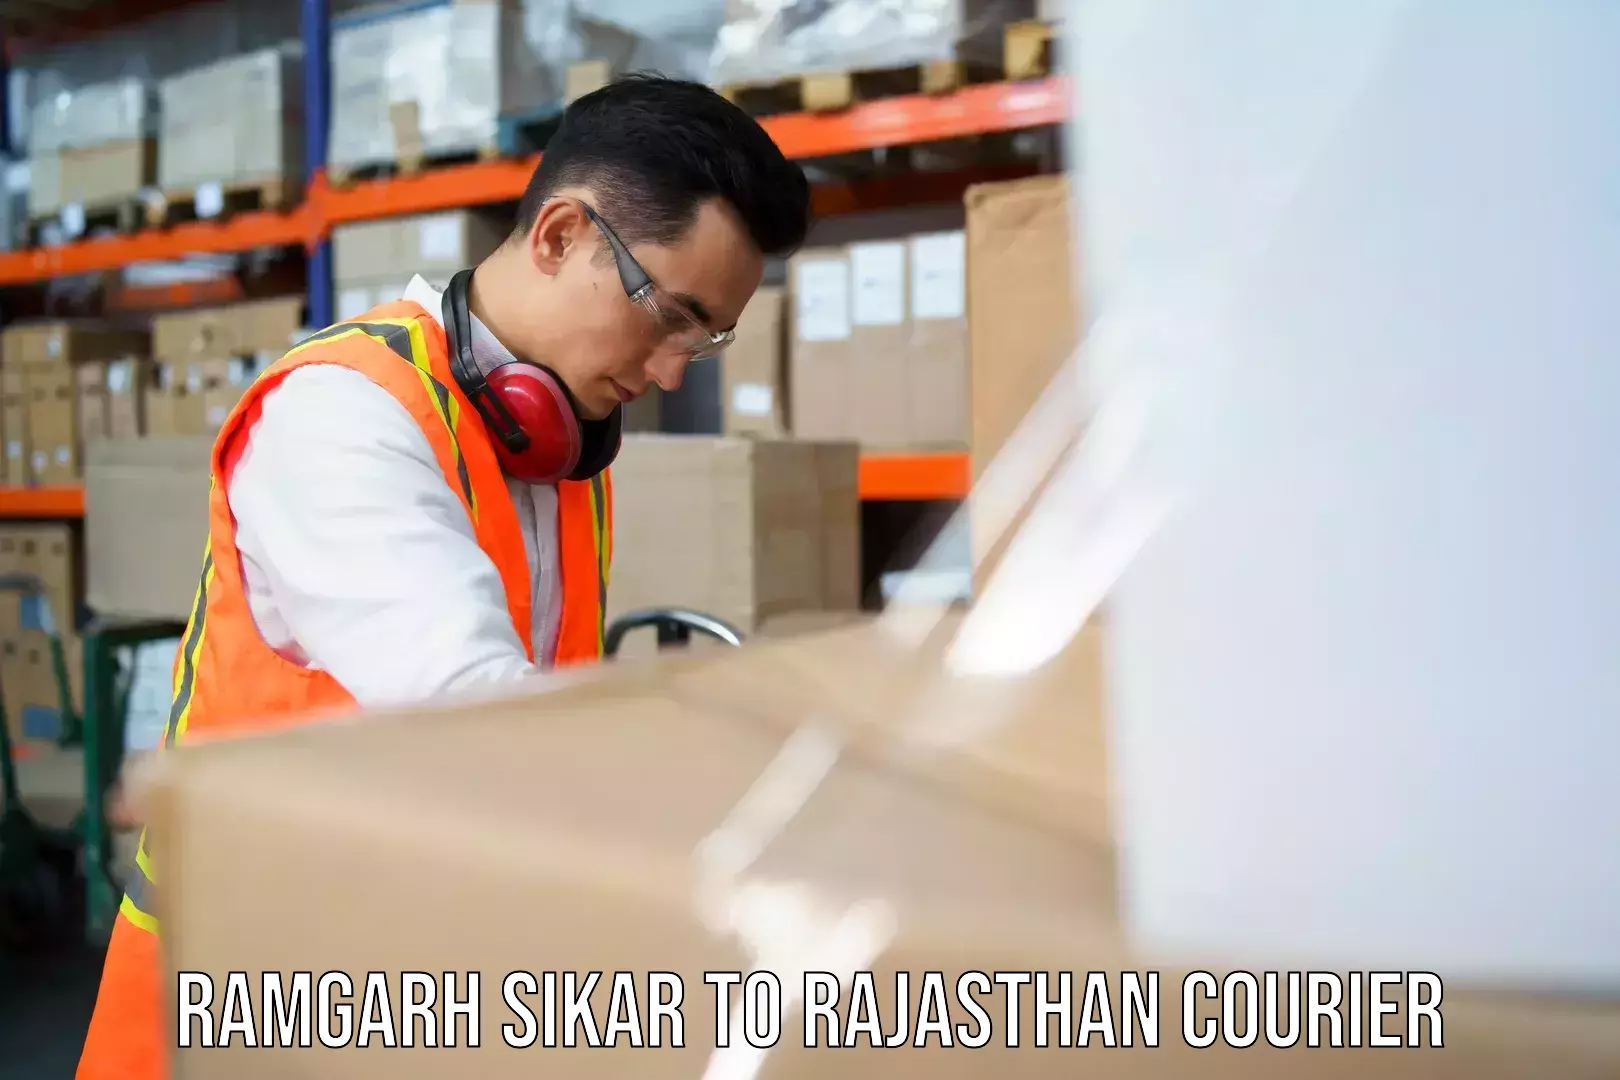 Cost-effective shipping solutions Ramgarh Sikar to Chittorgarh